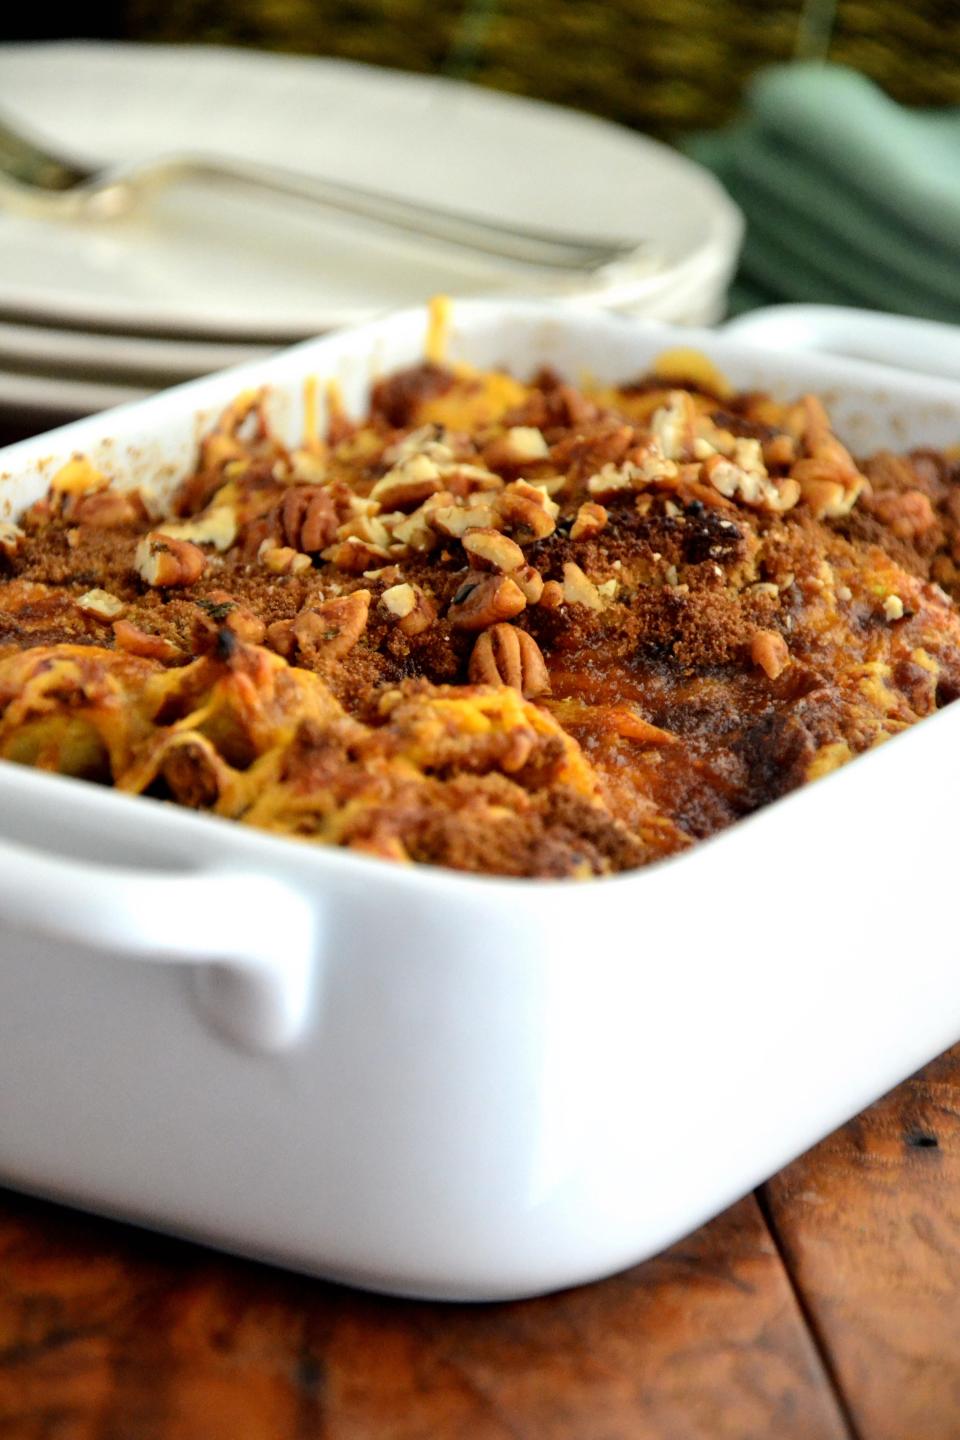 This wild rice and sage stuffing also makes a perfect Thanksgiving side.